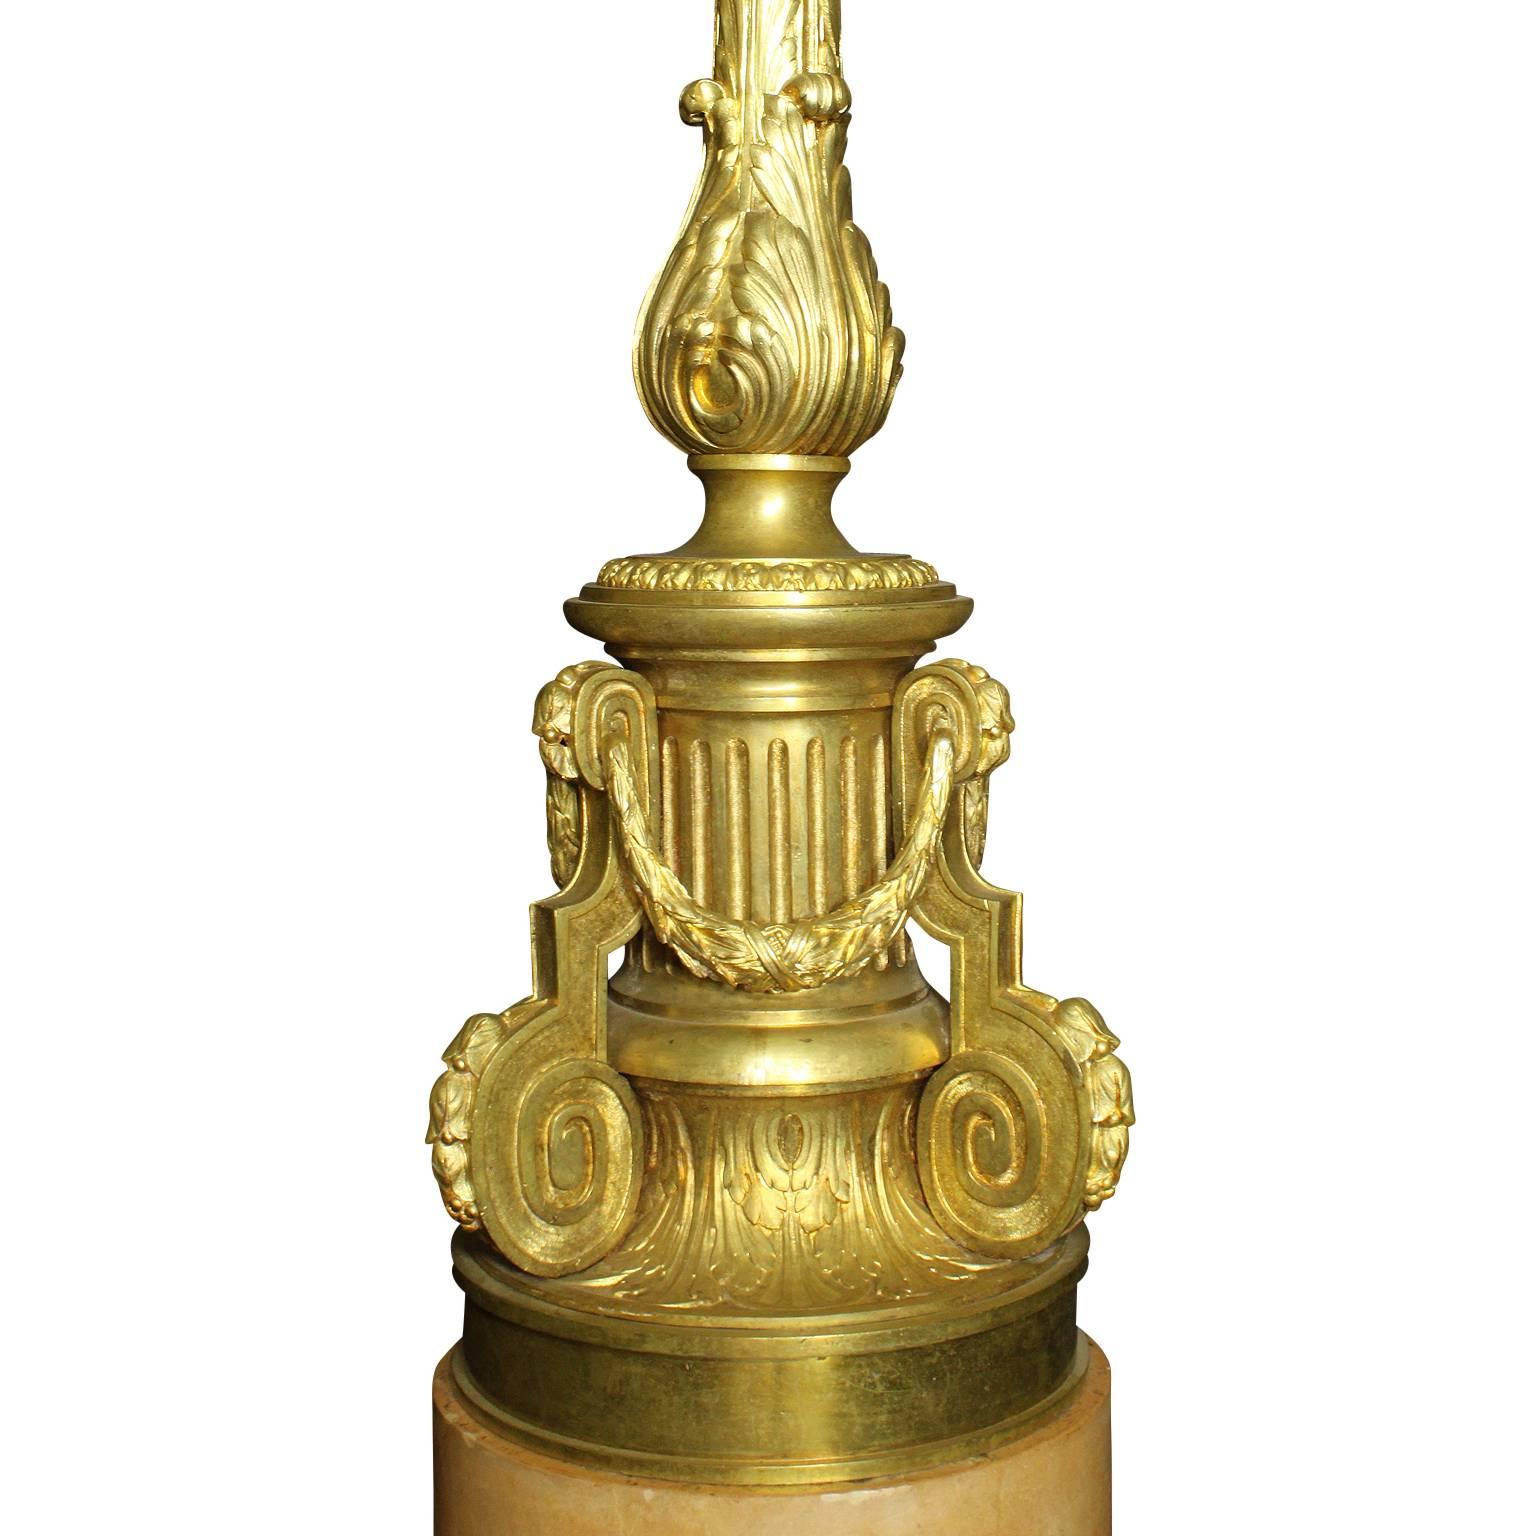 Early 20th Century Fine French 19th-20th Century Louis XV Style Belle Epoque Gilt-Bronze Torchere For Sale